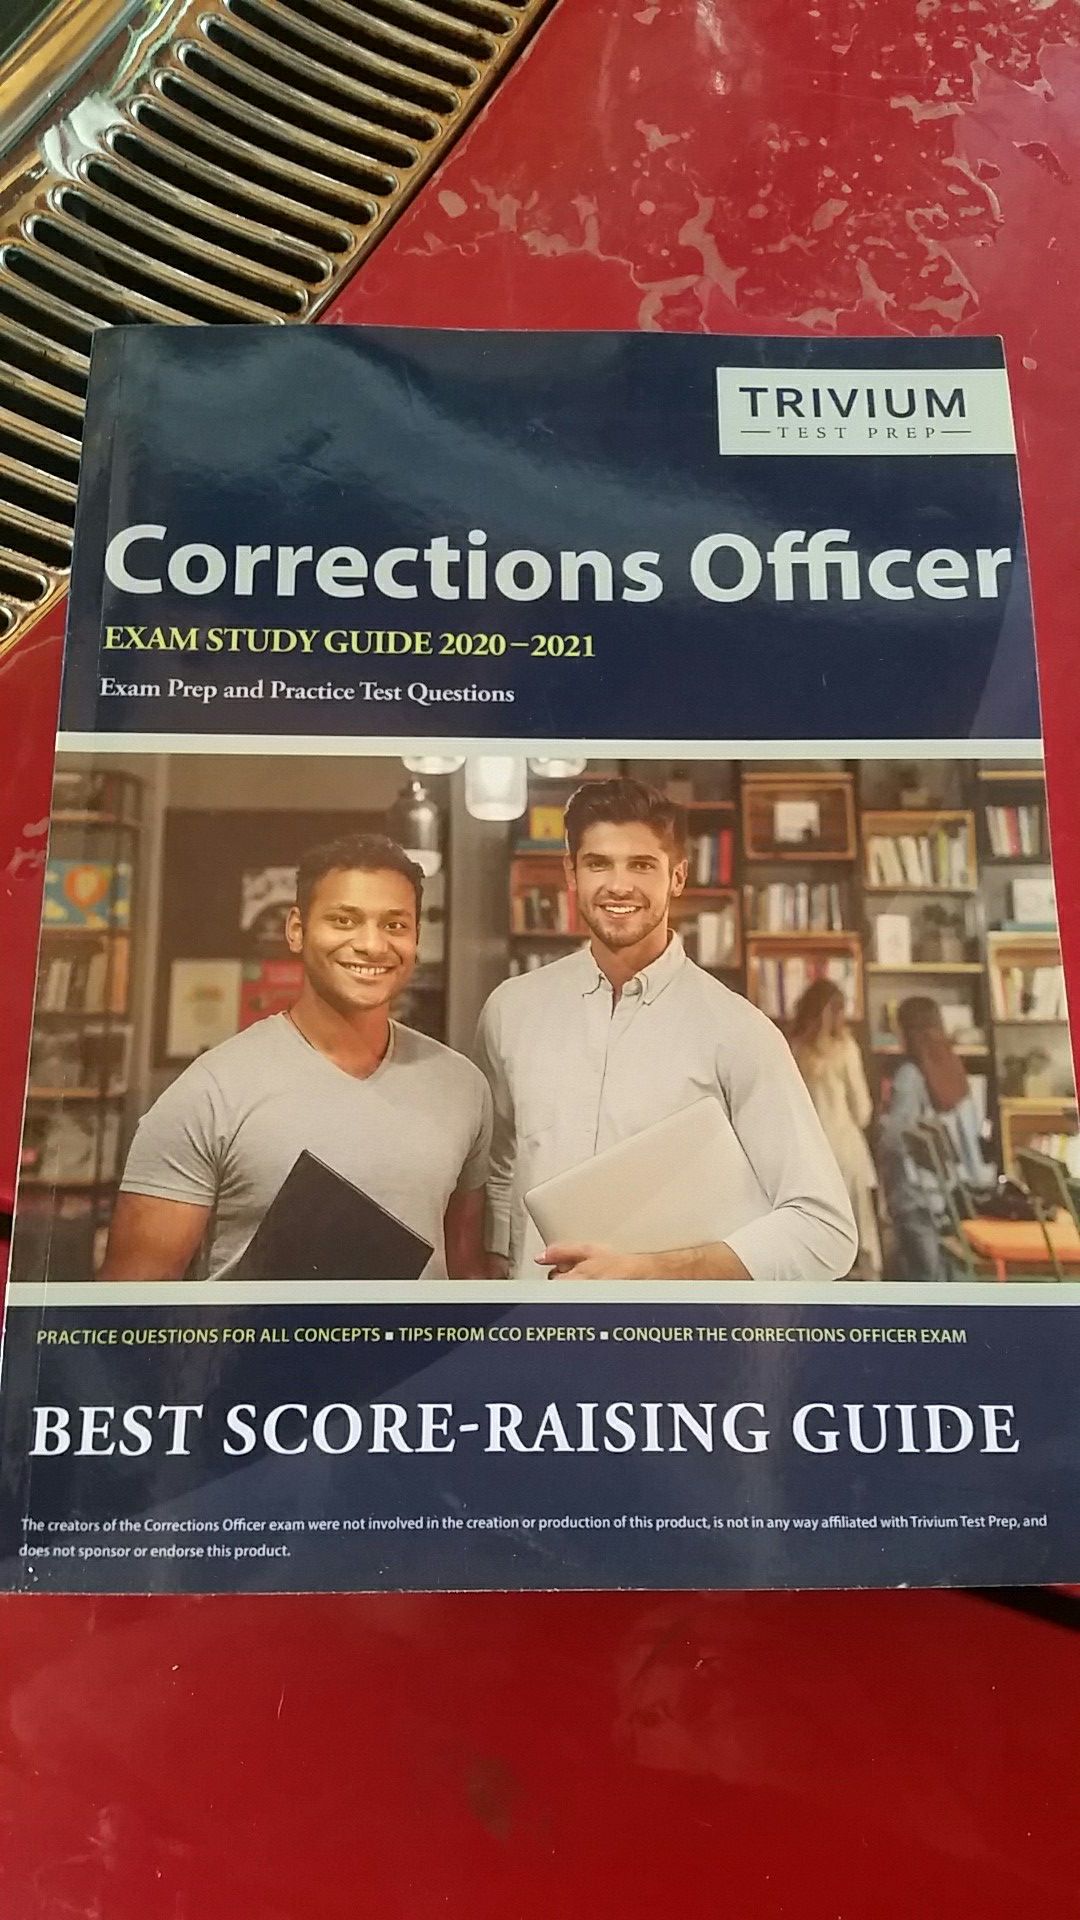 Corrections officer study guide